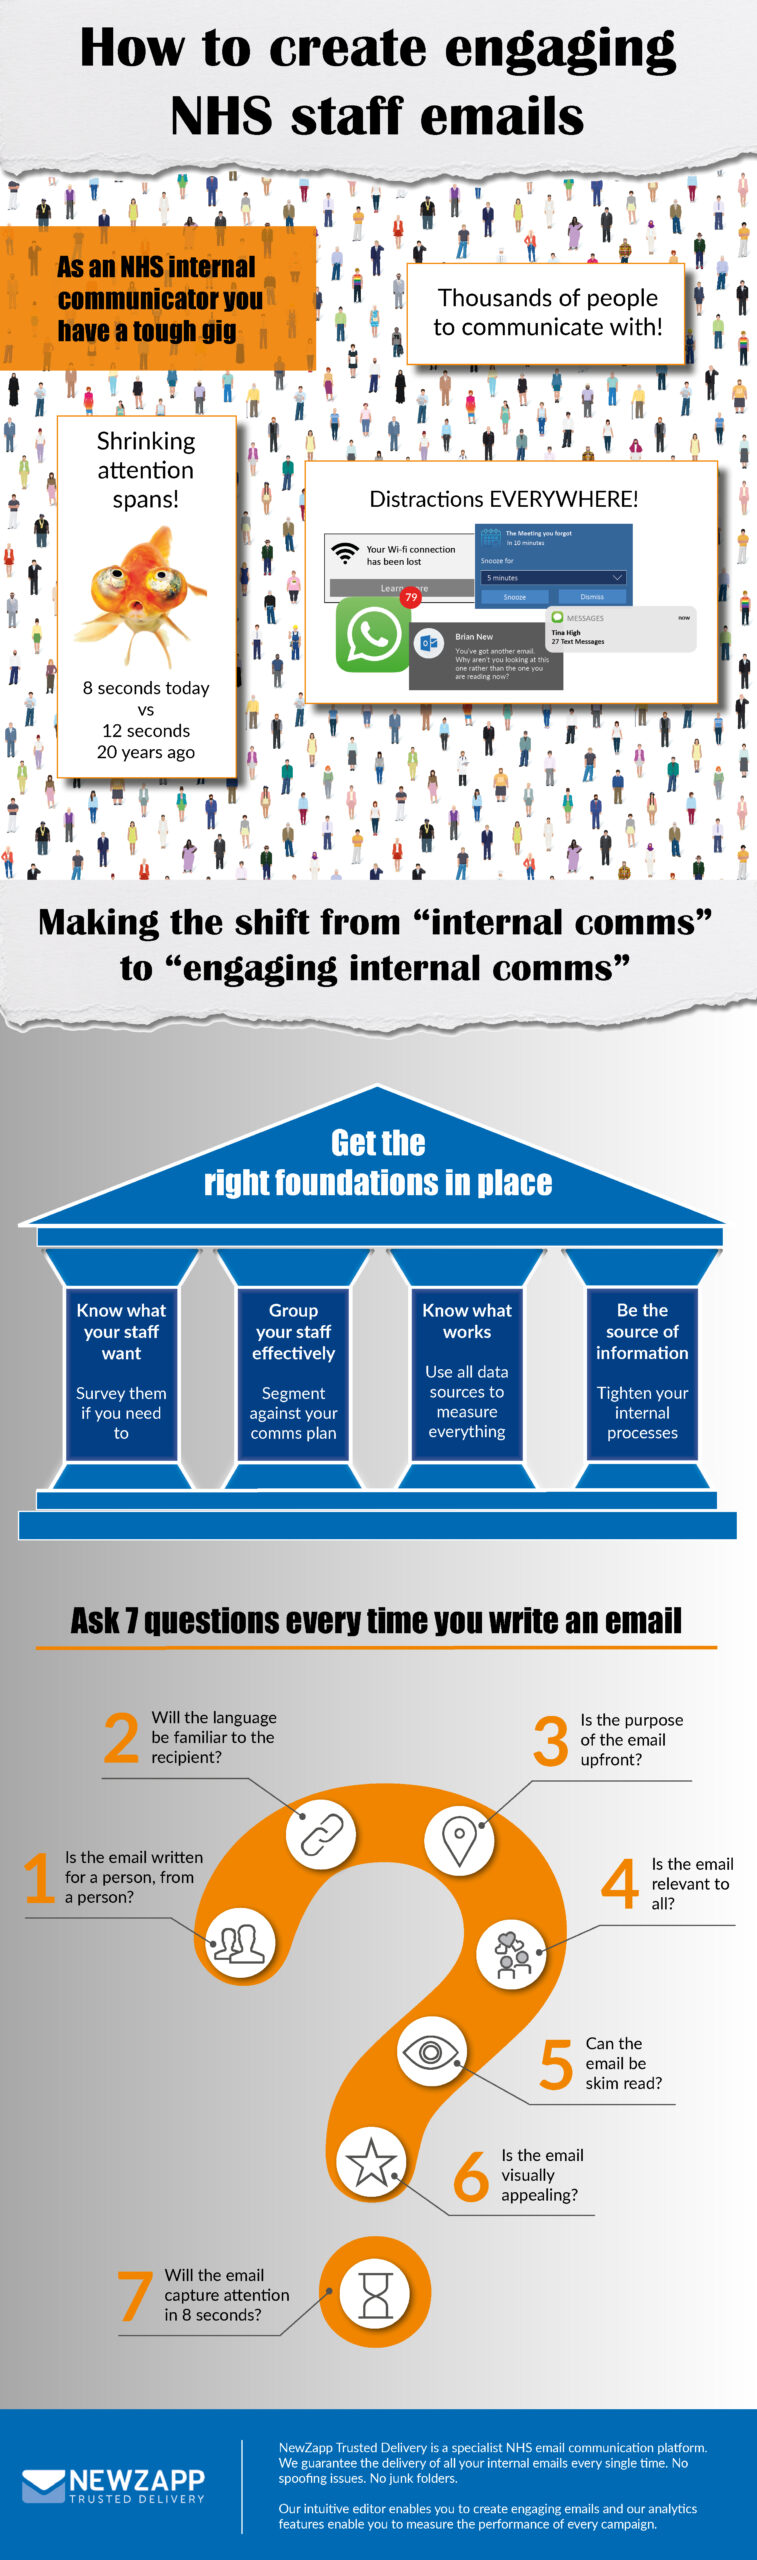 How to create engaging NHS internal communications